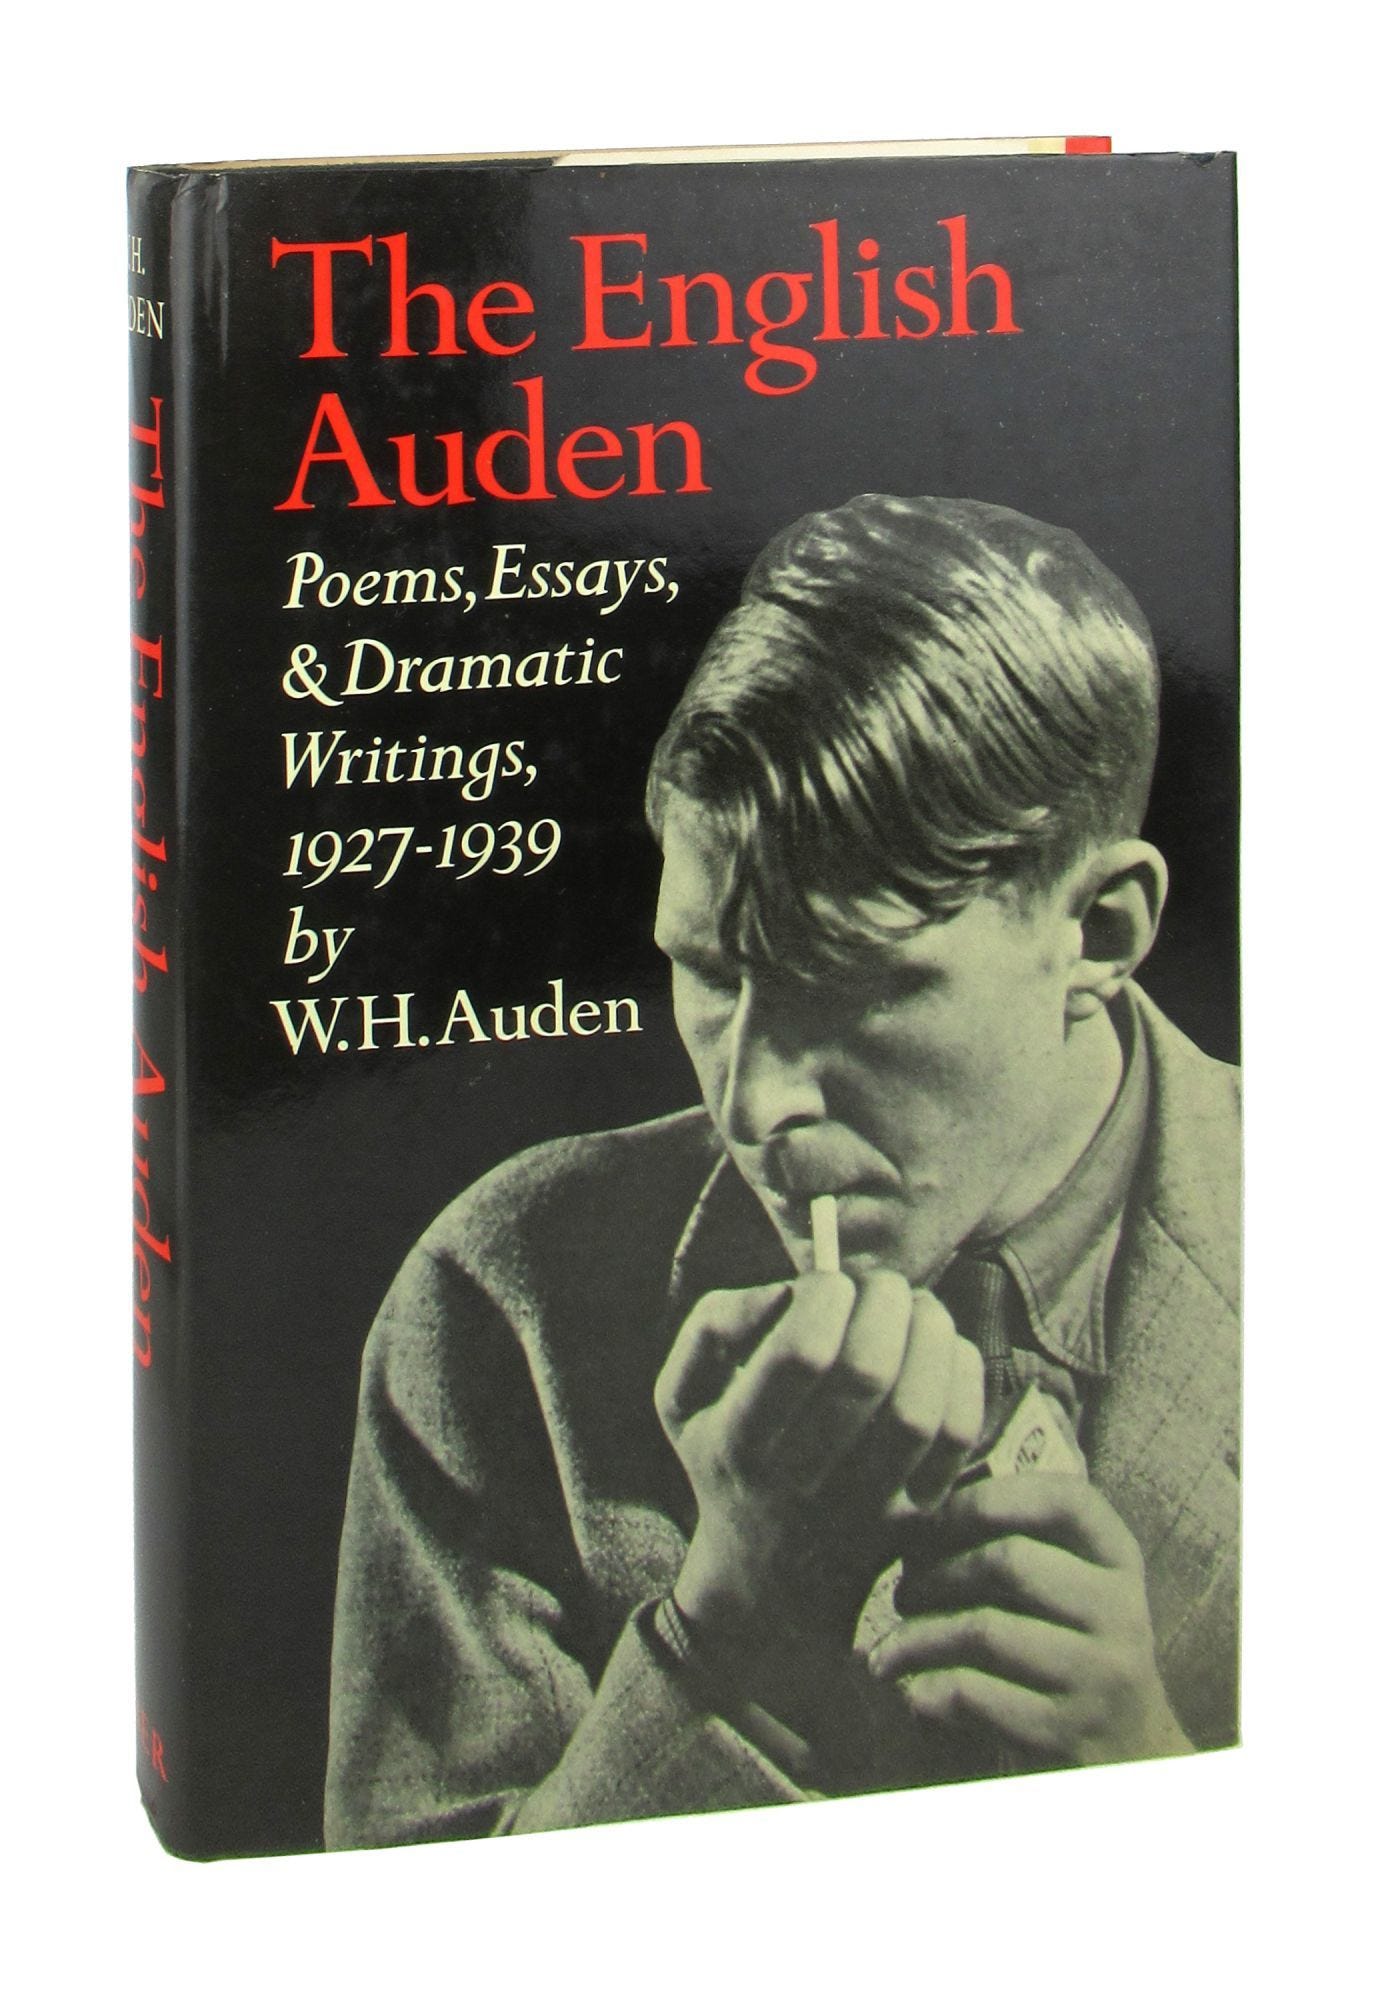 Cover of The English Auden: 1927-1939, showing the poet as a young man, about to light a cigarette